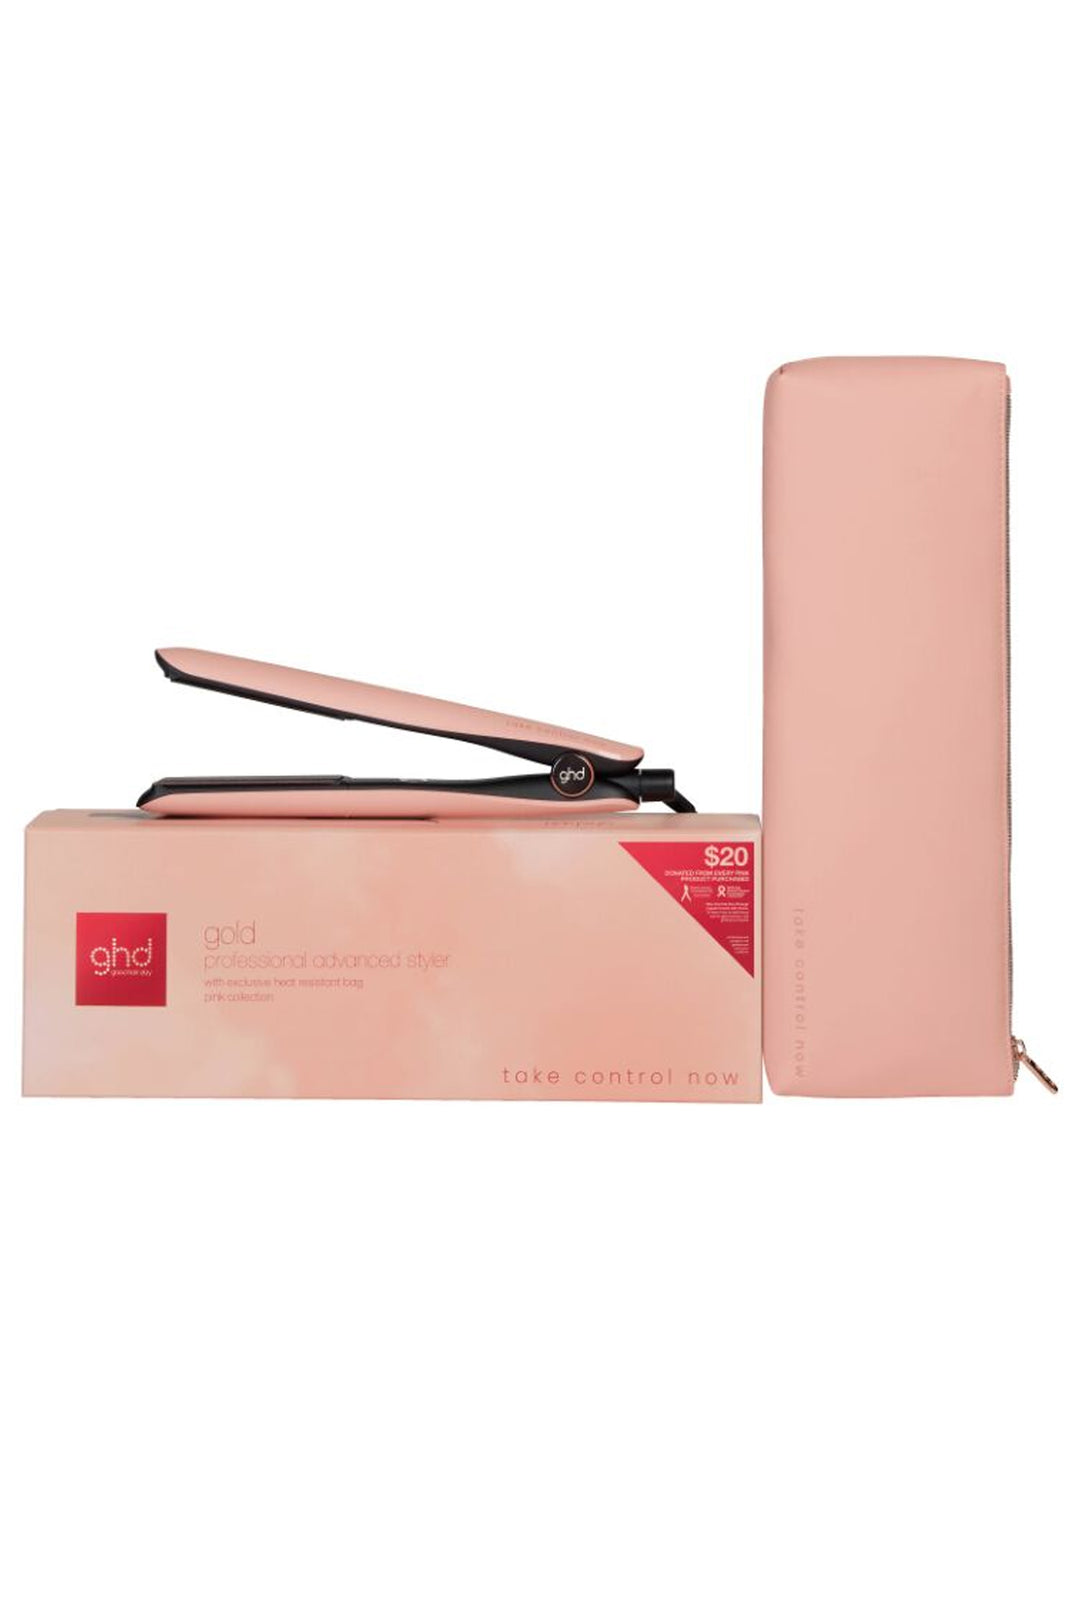 GHD GOLD TAKE CONTROL NOW PINK COLLECTION